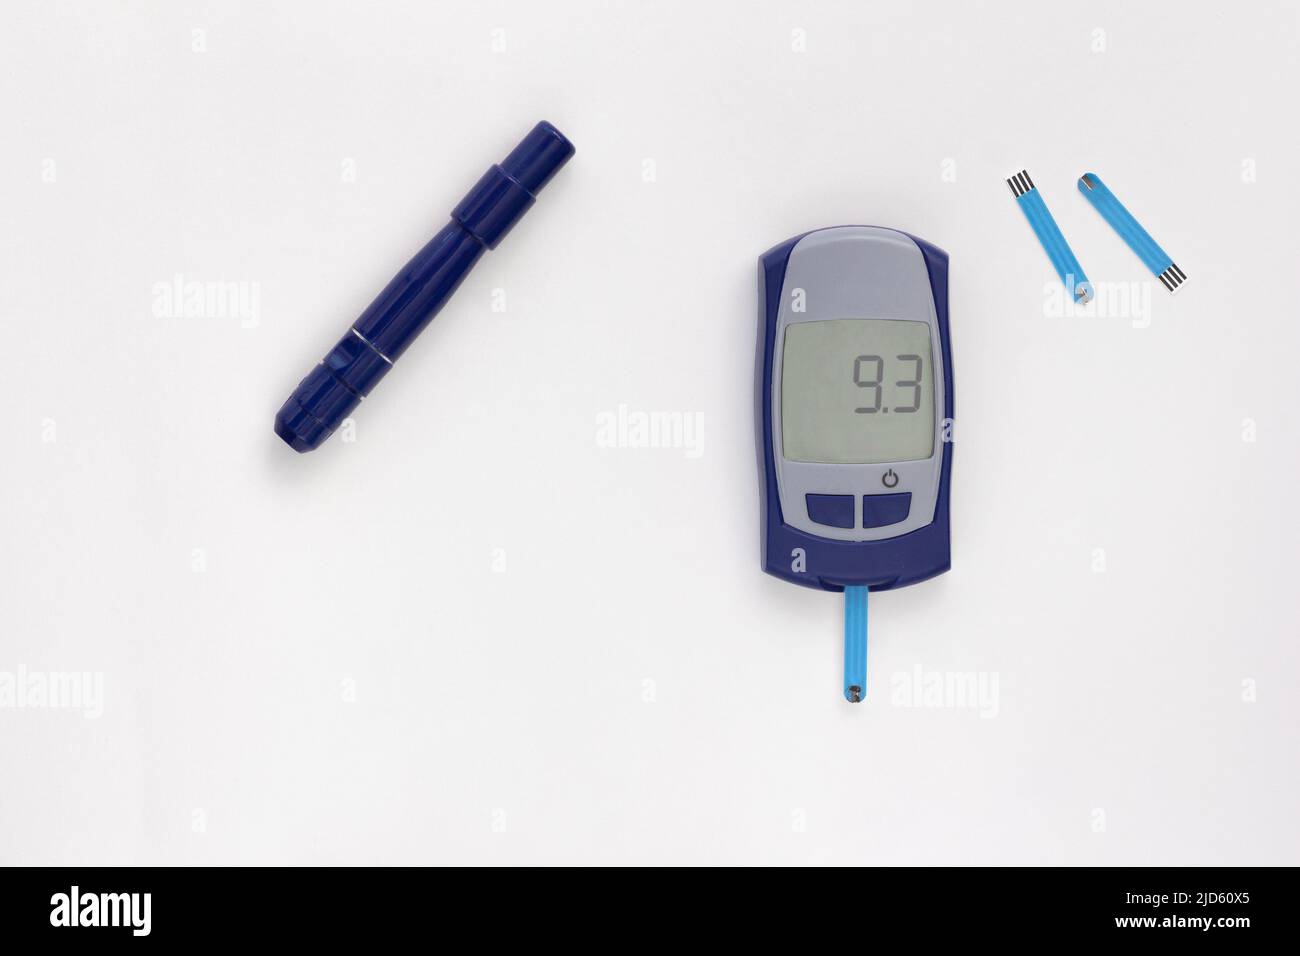 Top view of glucometer with nine point three 9.3 mmol per liter glycemic index on display with blooded test strip inside, lancet and test strips on wh Stock Photo